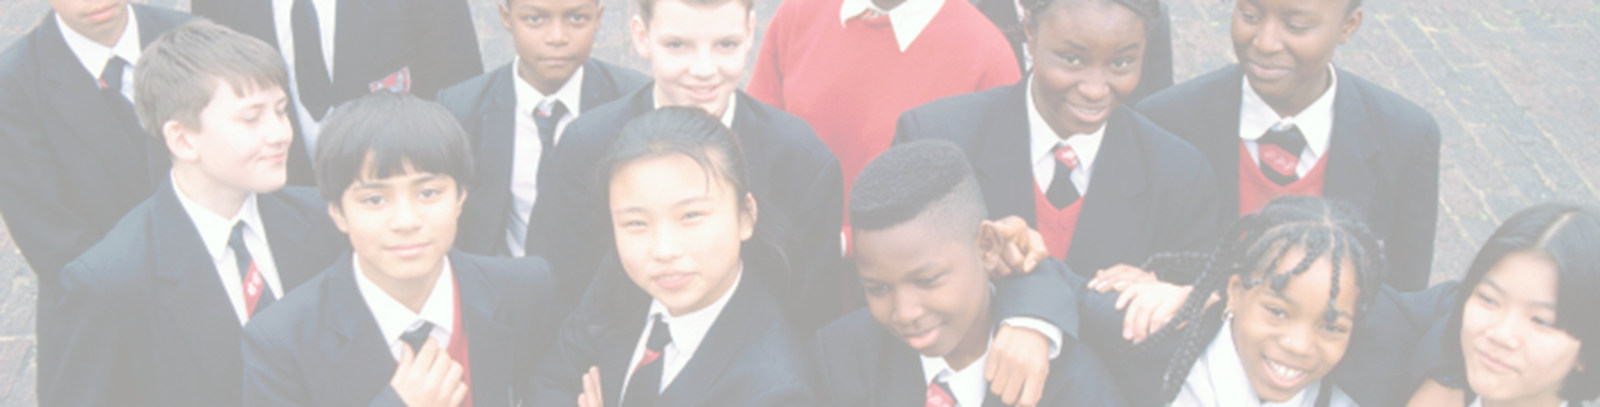 We provide services to schools and organisations